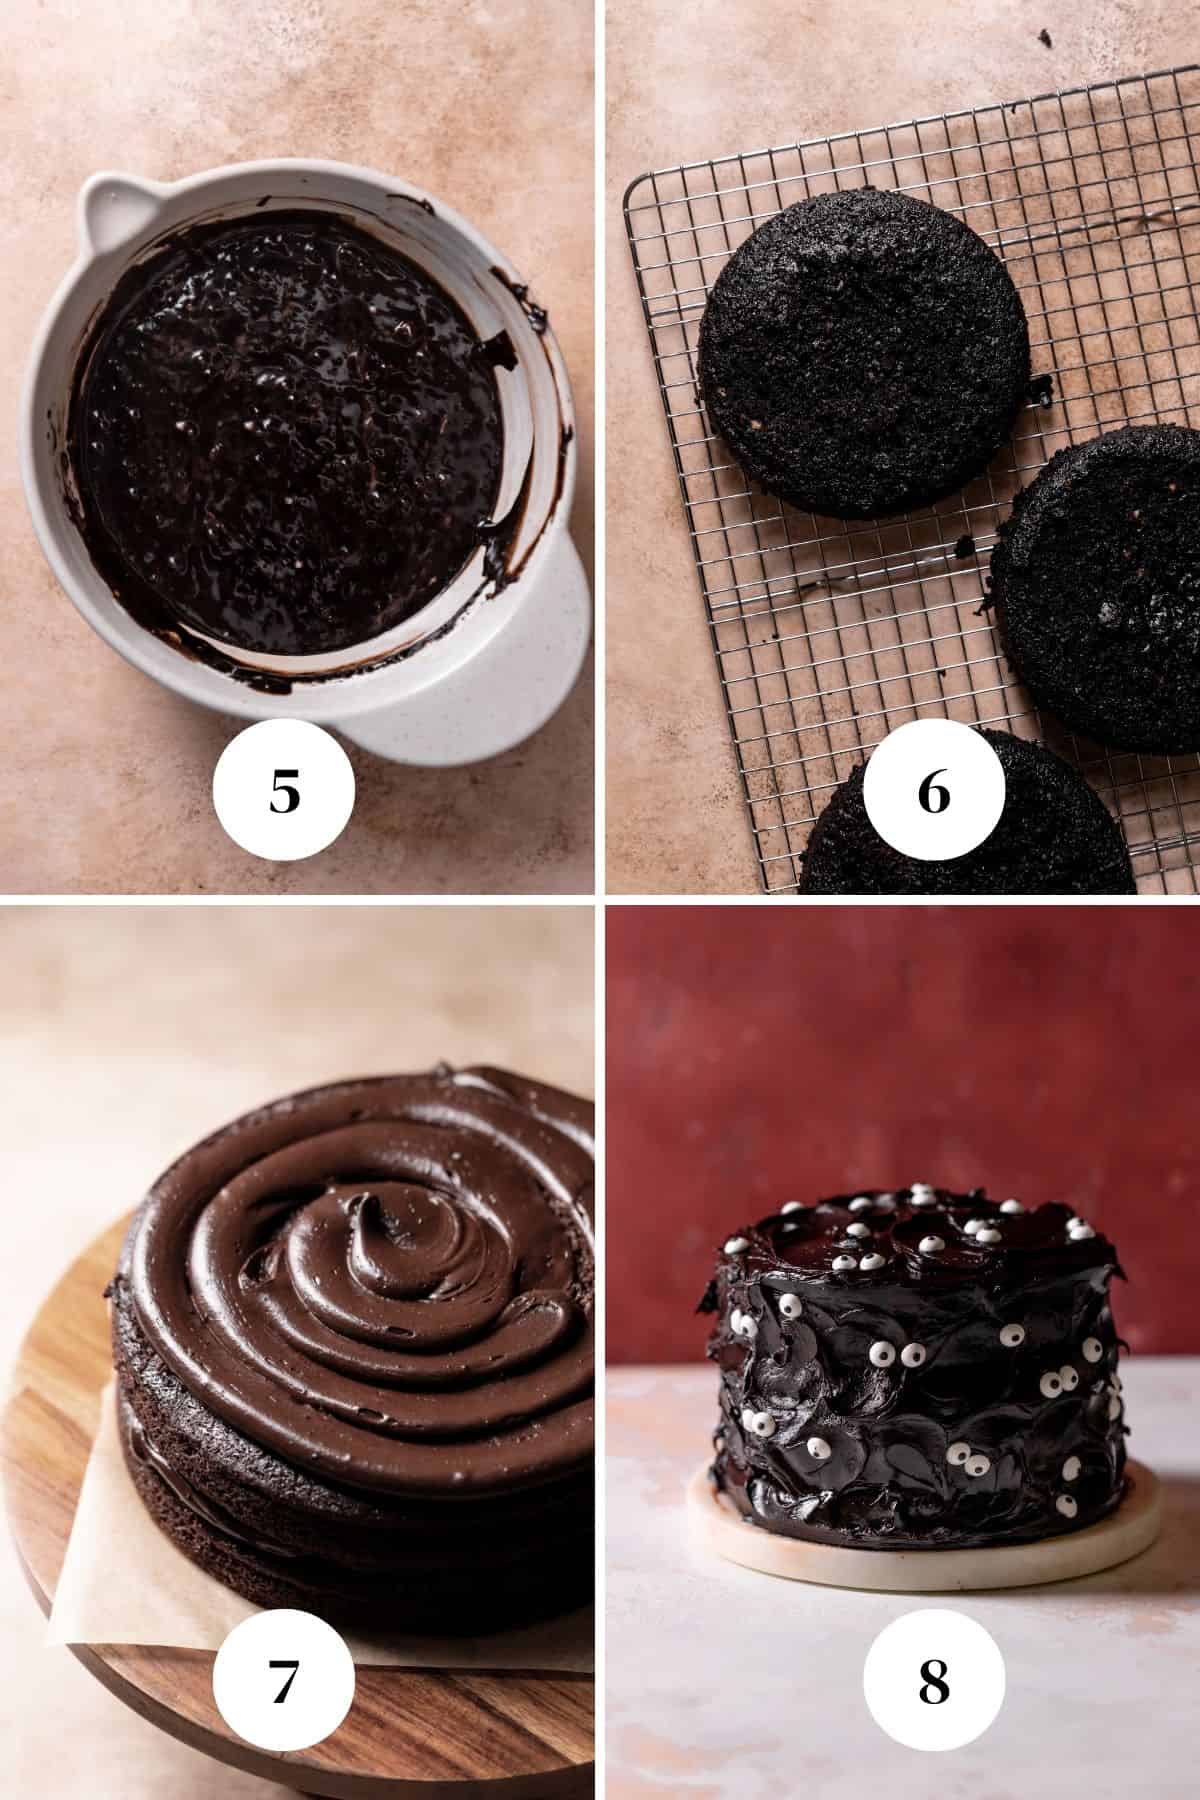 A process collage of the steps for assembling and decorating black velvet cake.